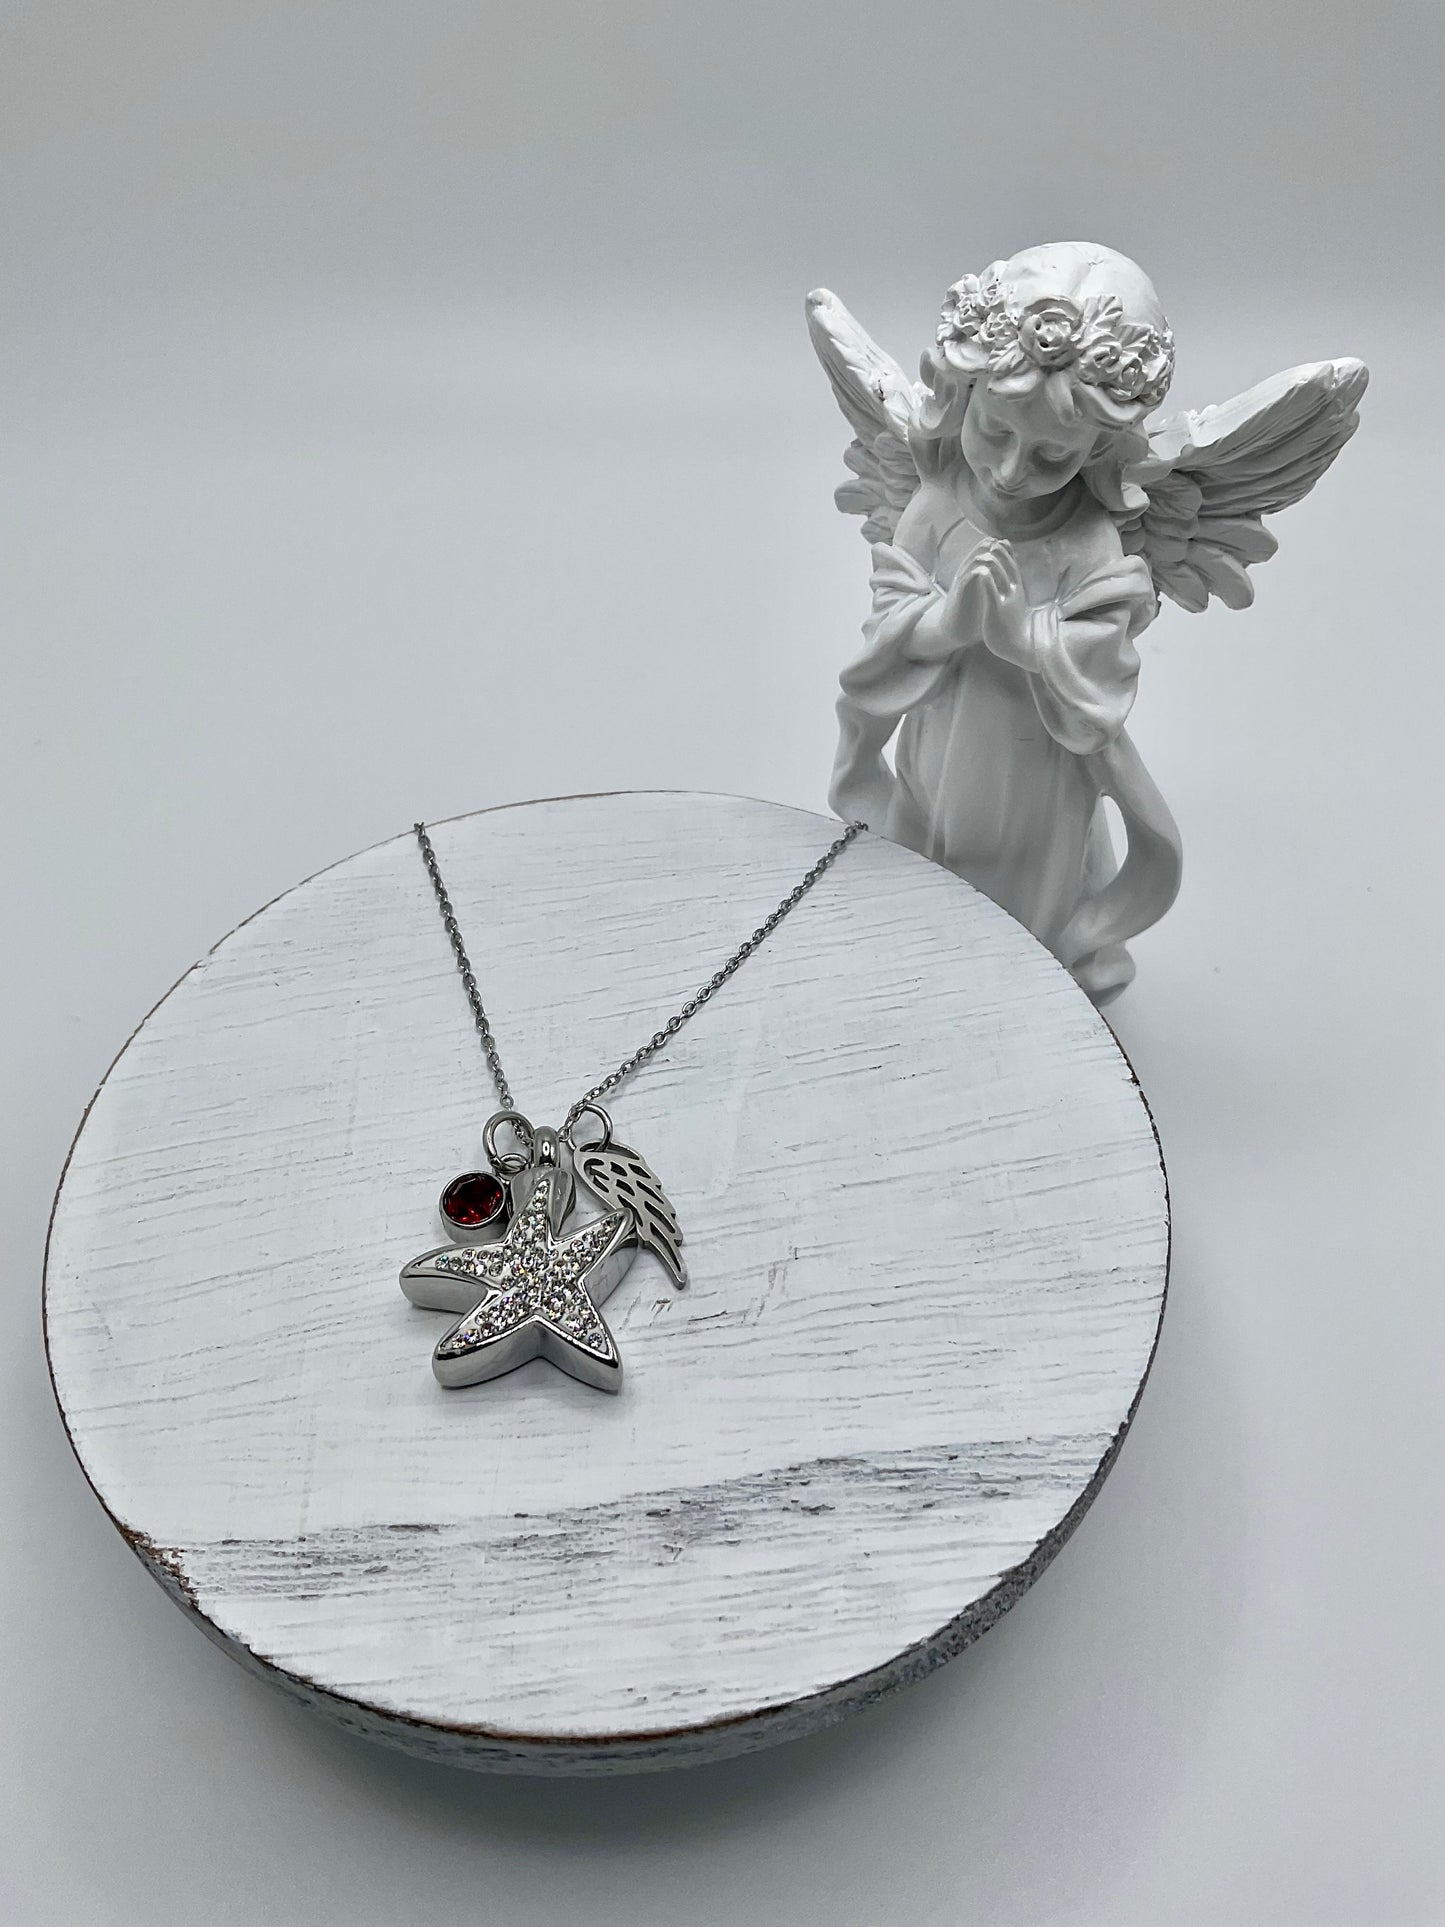 Silver Star with Rhinestones Ash Urn Necklace Charm Birthstone with Personalization for Male or Female Funeral Memorial